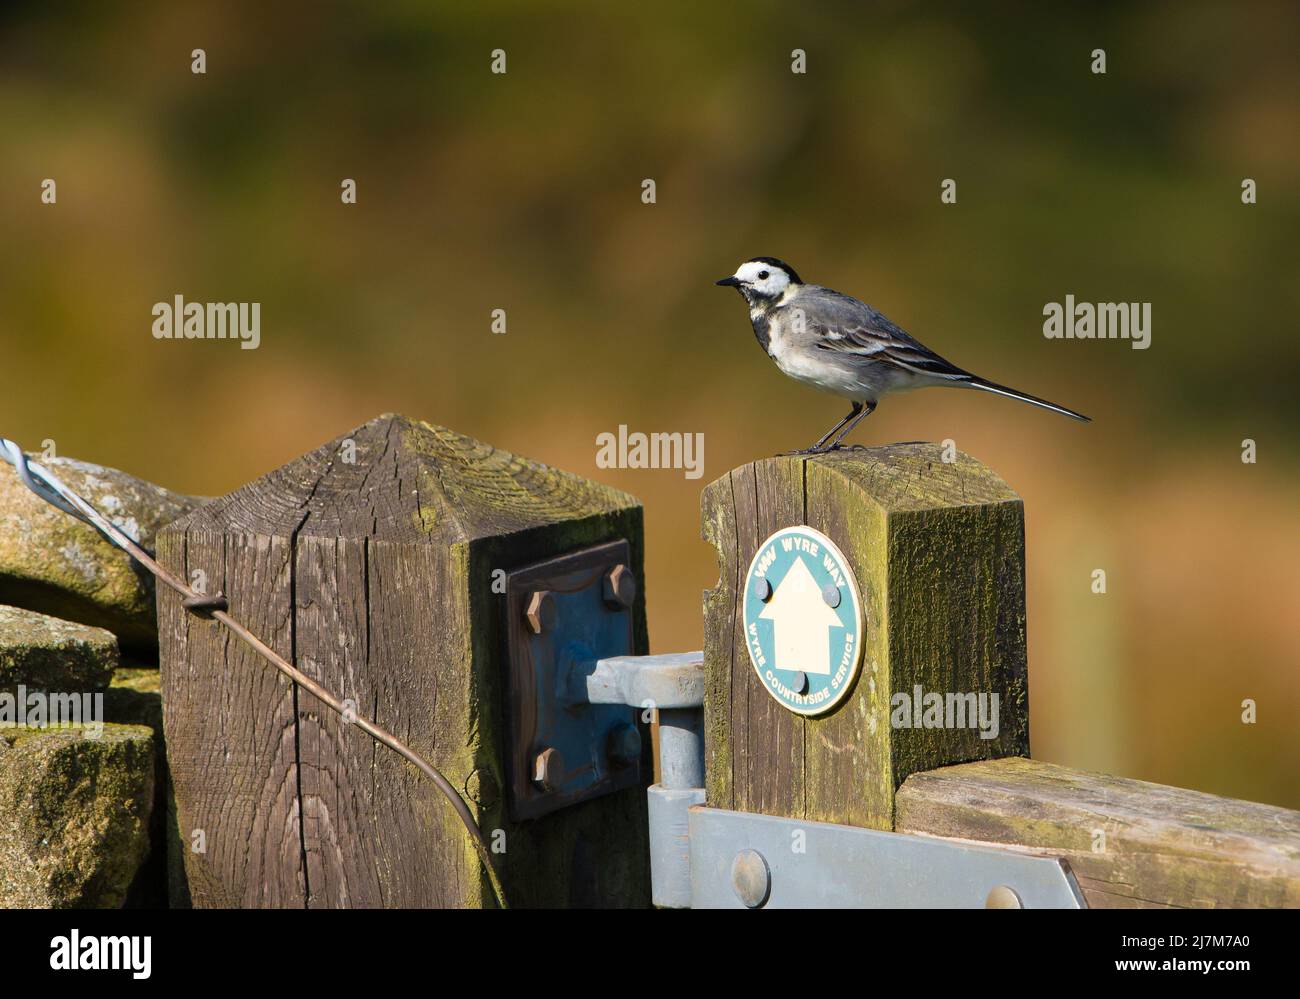 A Pied Wagtail perched on a wooden gate, Marshaw, Lancaster, Lancashire, UK Stock Photo